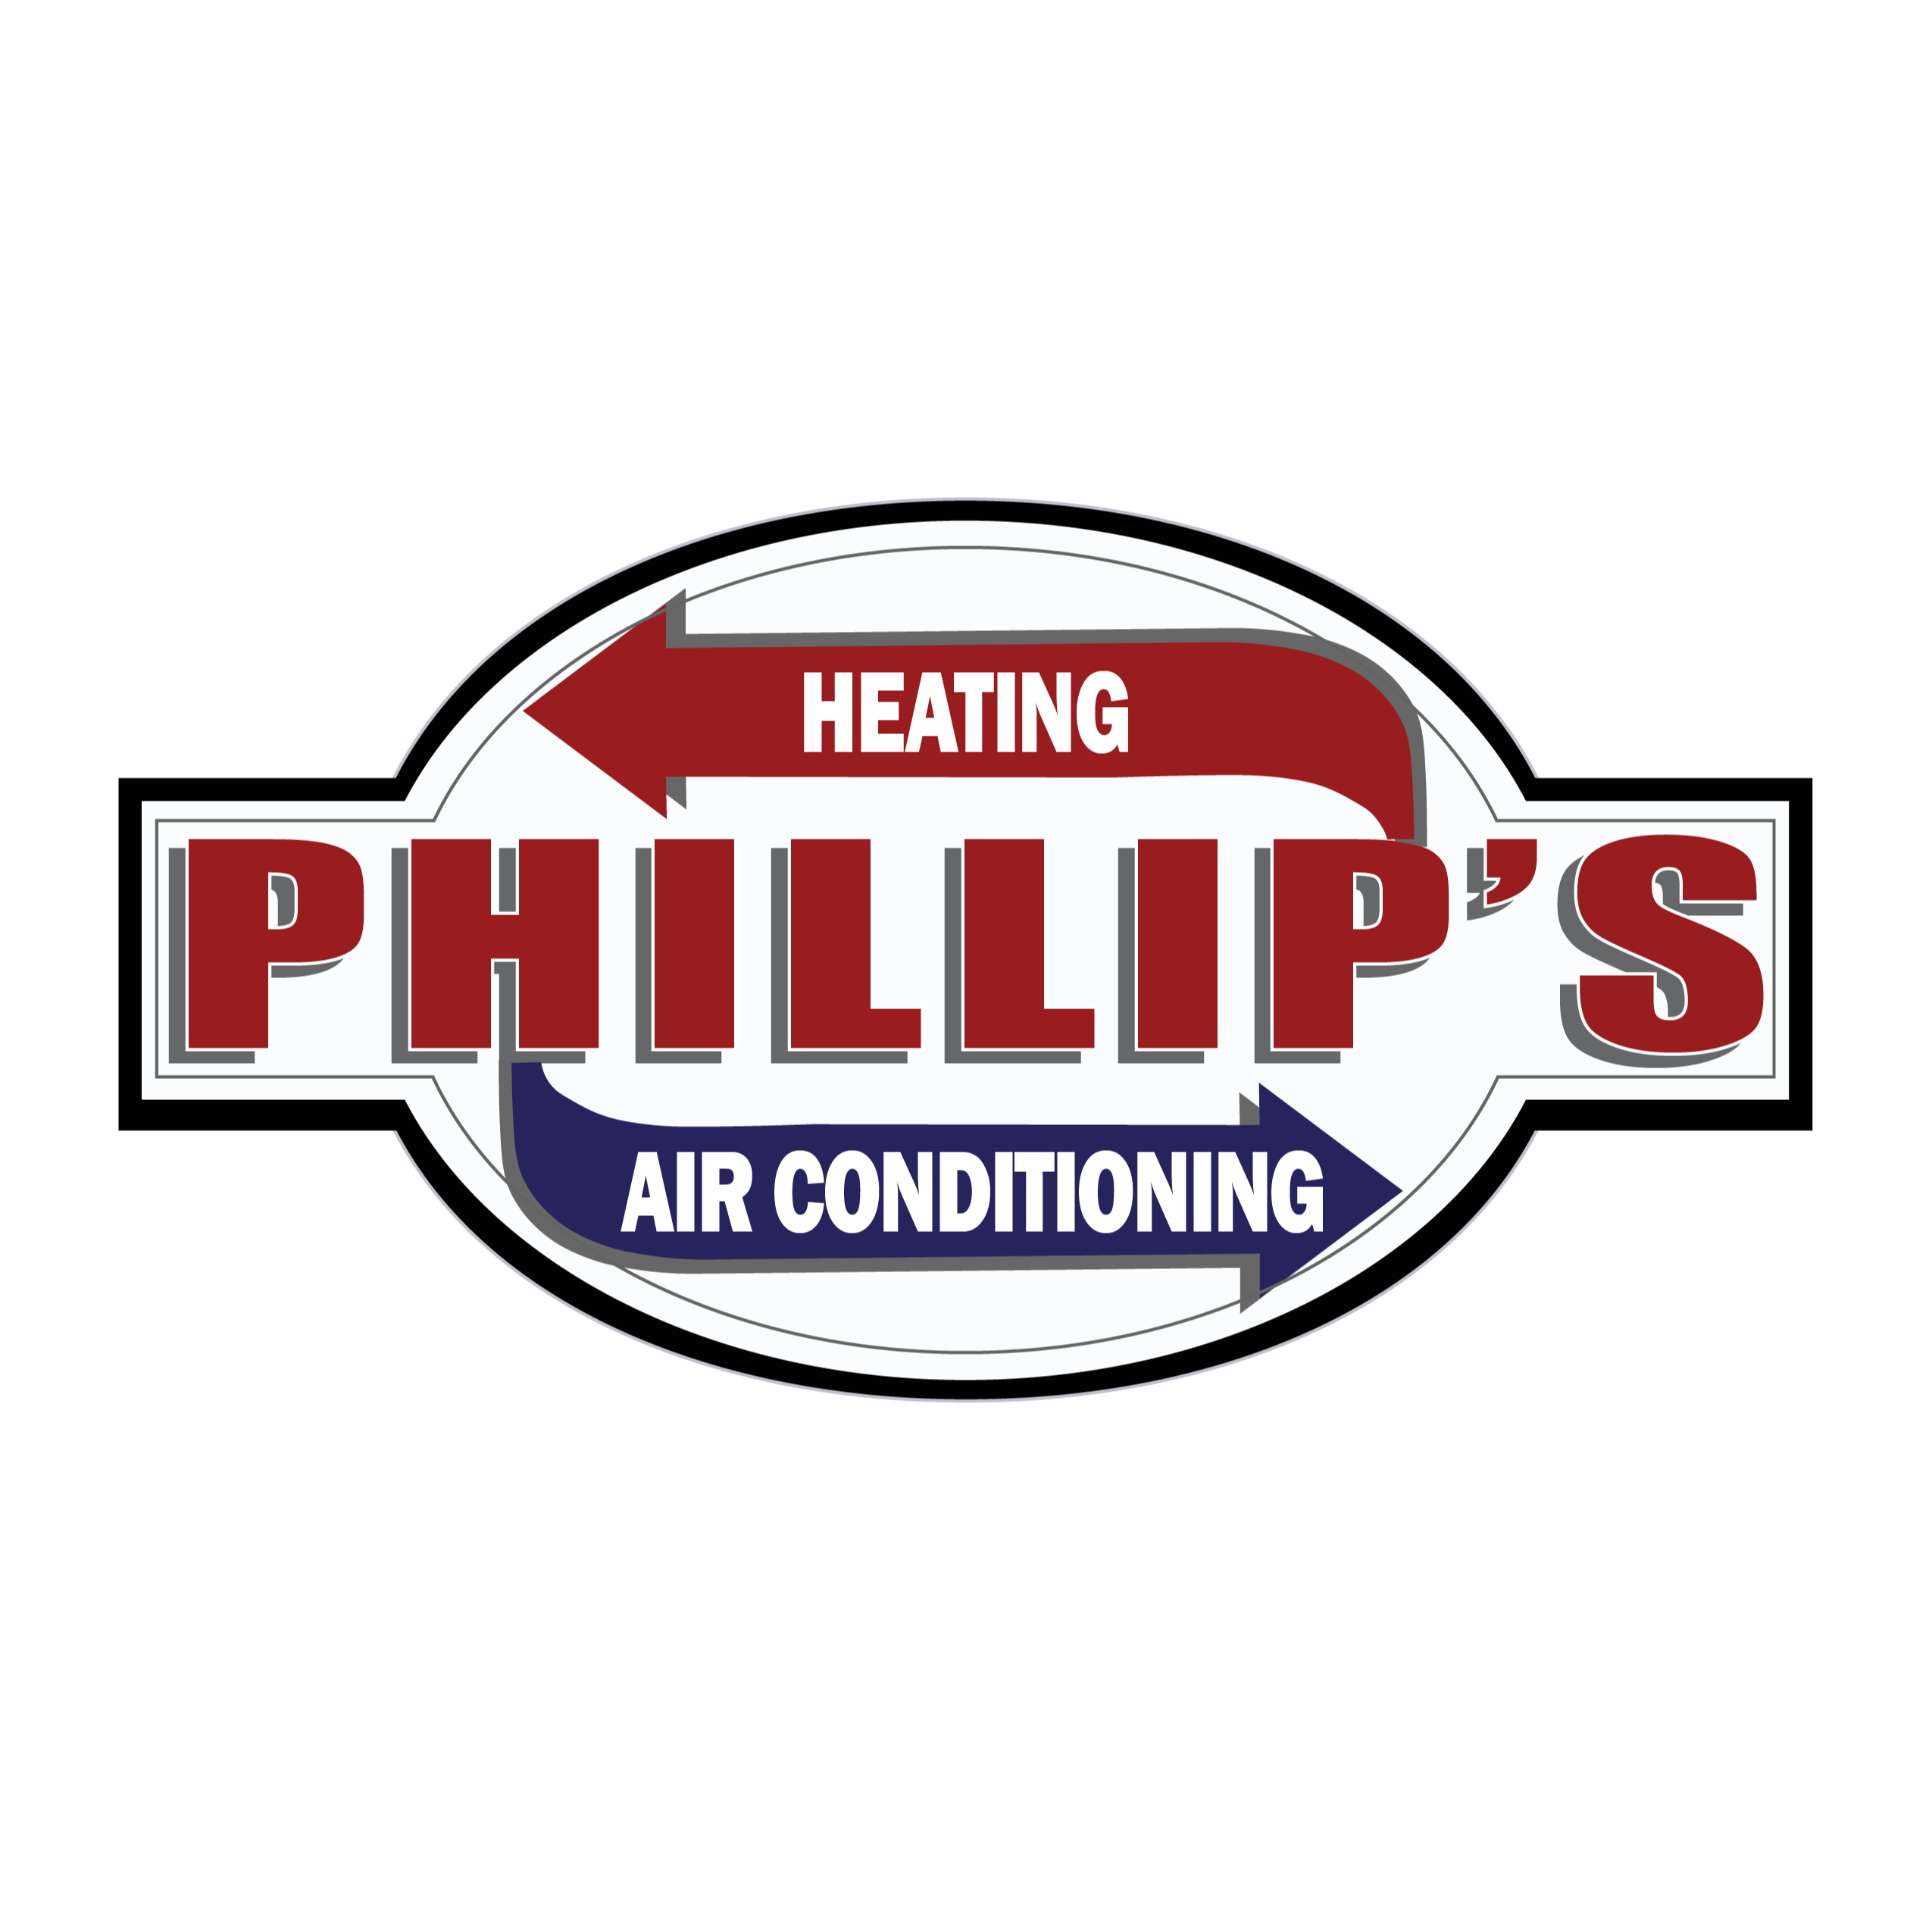 Phillips Heating and Air Conditioning